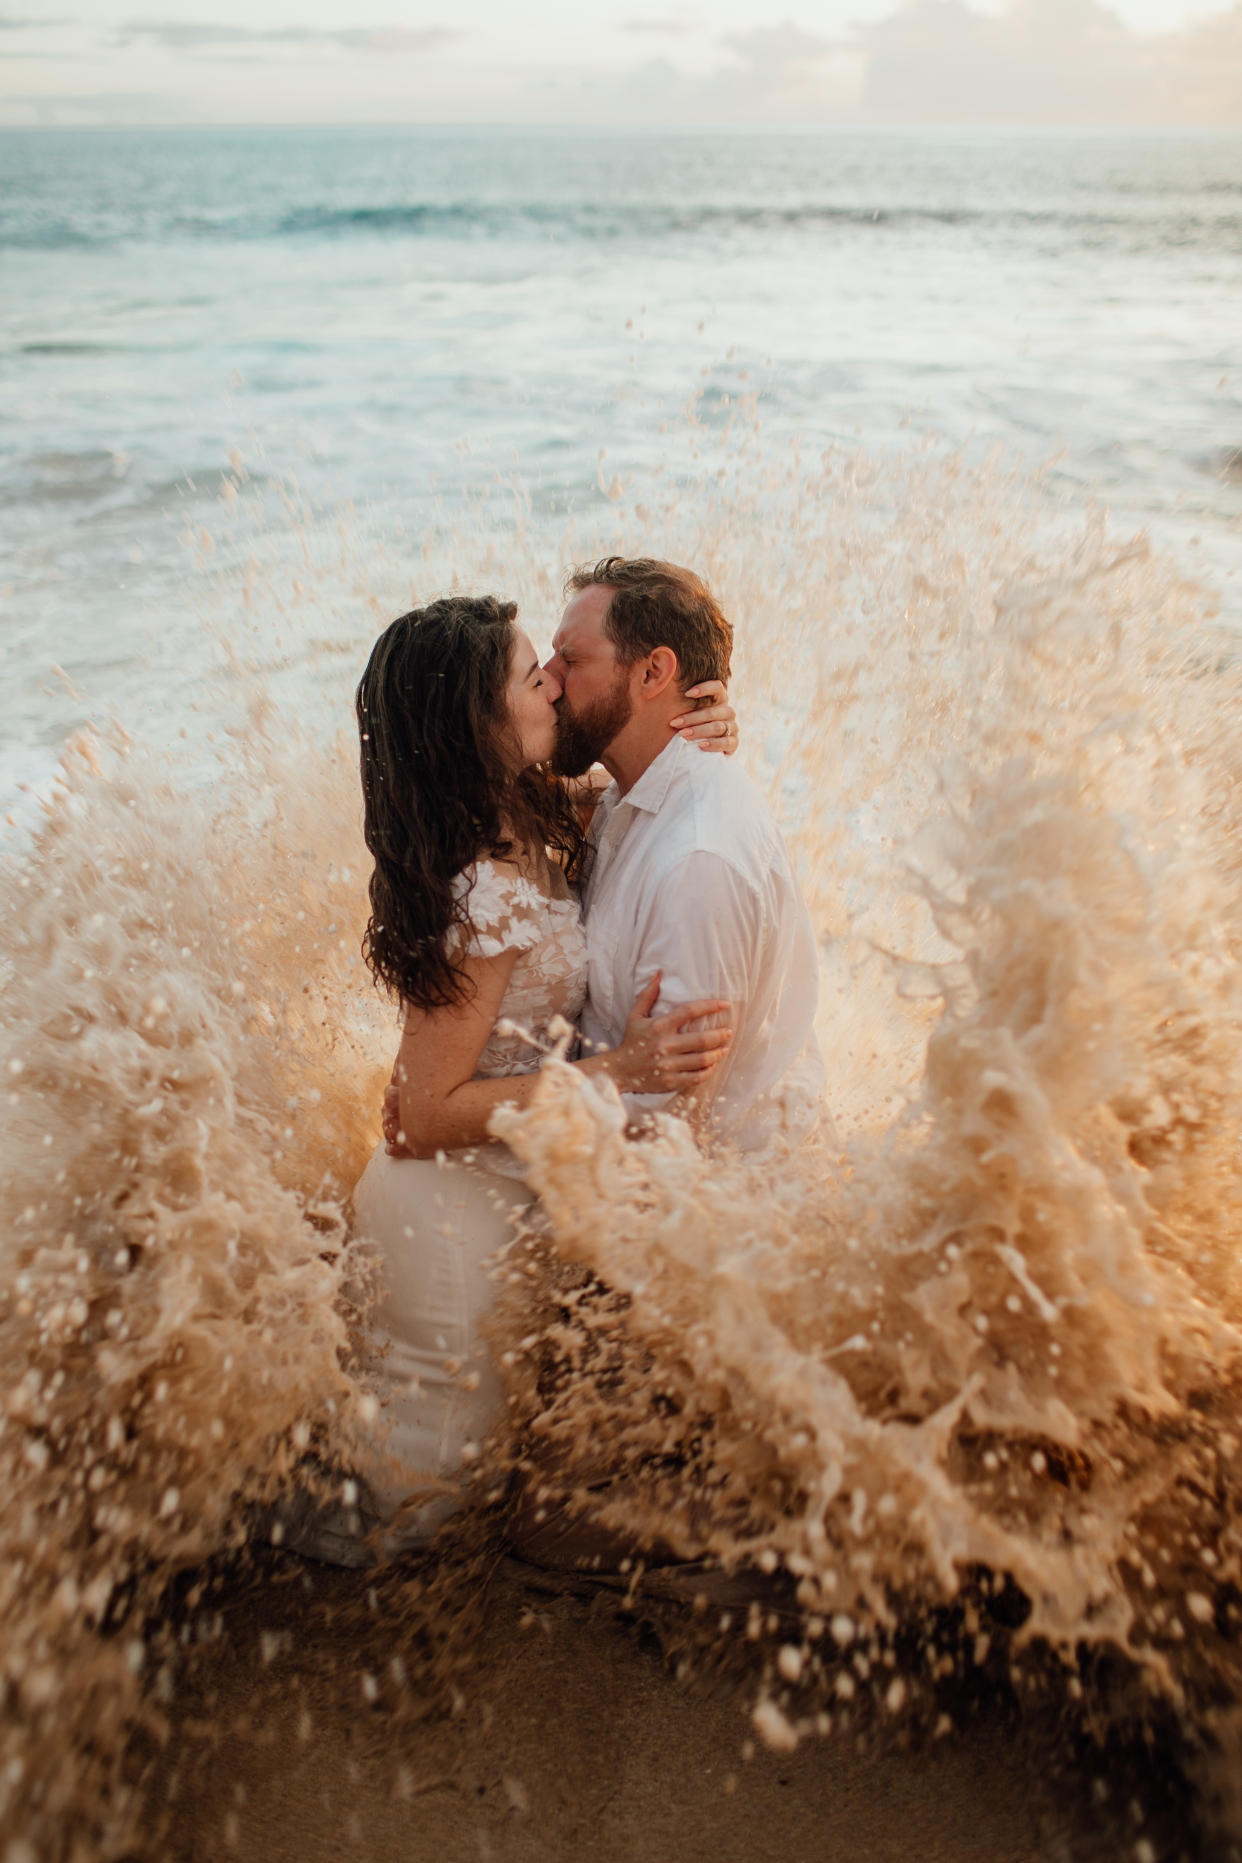 Bekah Blakely-Savage and husband Tim were taken out by a wave during their wedding photo shoot. (Photo: Courtesy of Sunny Golden)